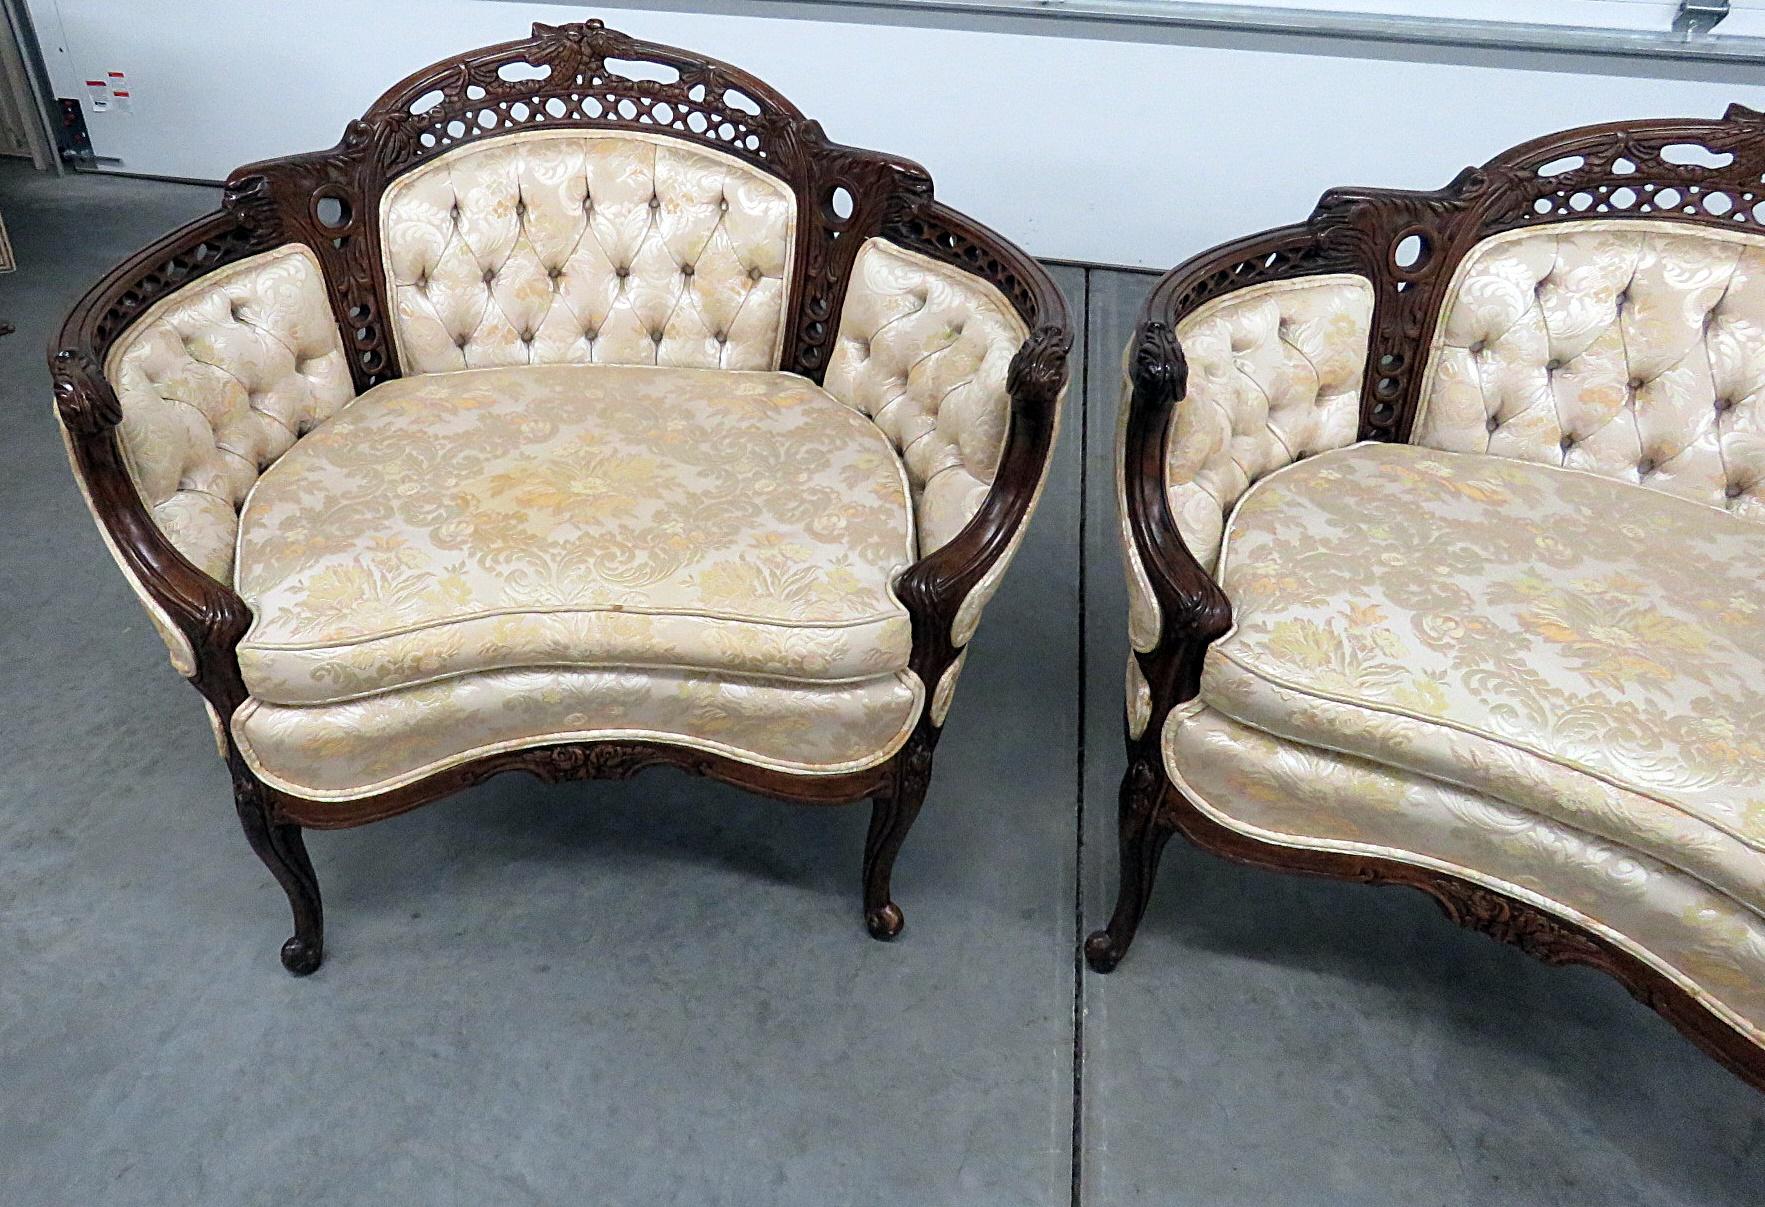 American Pair of French Carved Mahogany Tufted Louis XV Style Marquis Bergere Chairs